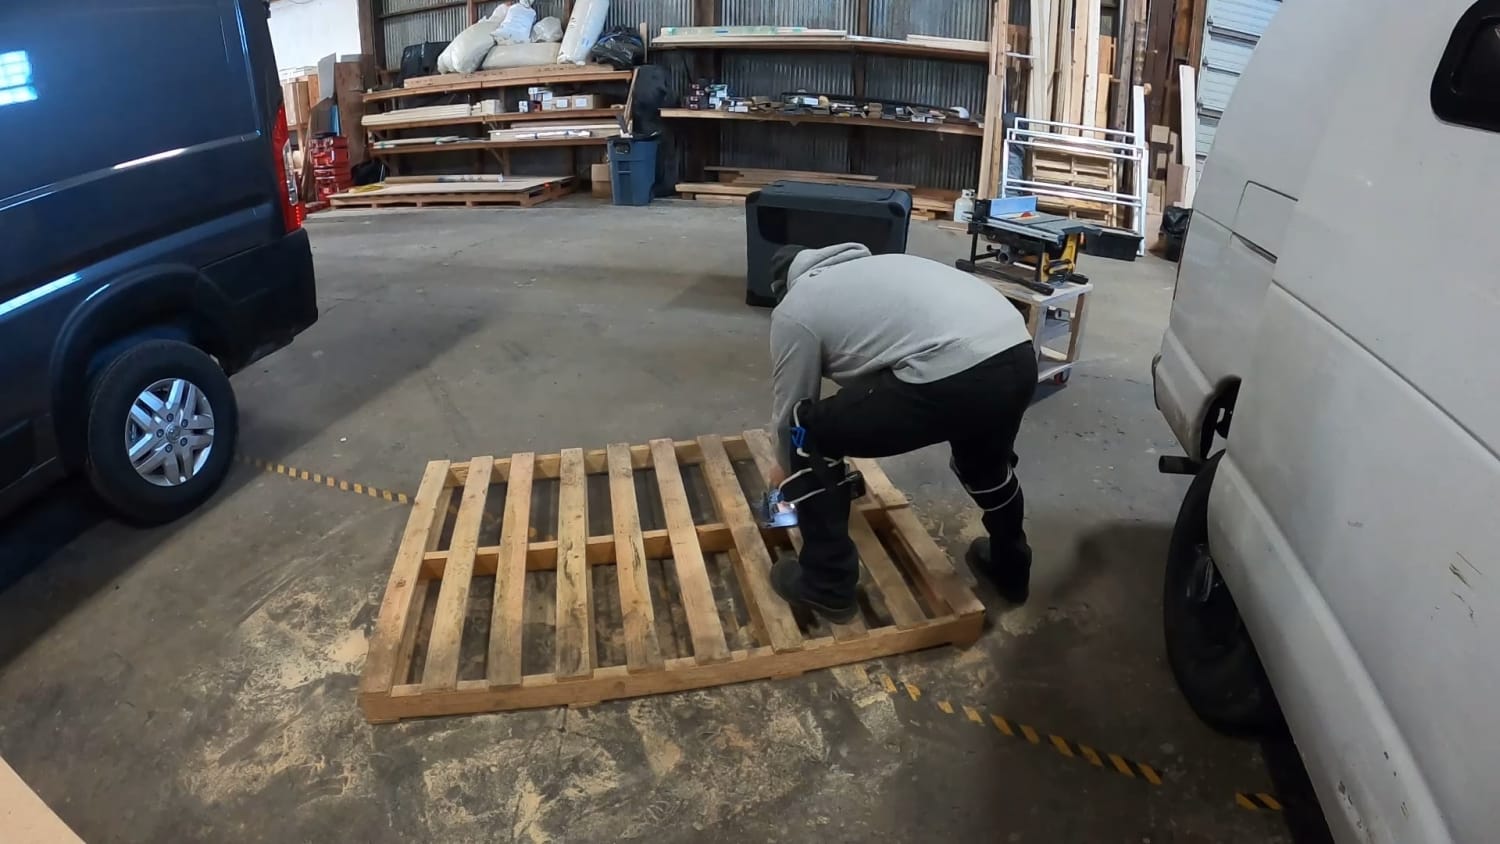 Time Lapse of how I did a pallet epoxy table and then put lights under to shine through. My other post has finished table look with lights on.